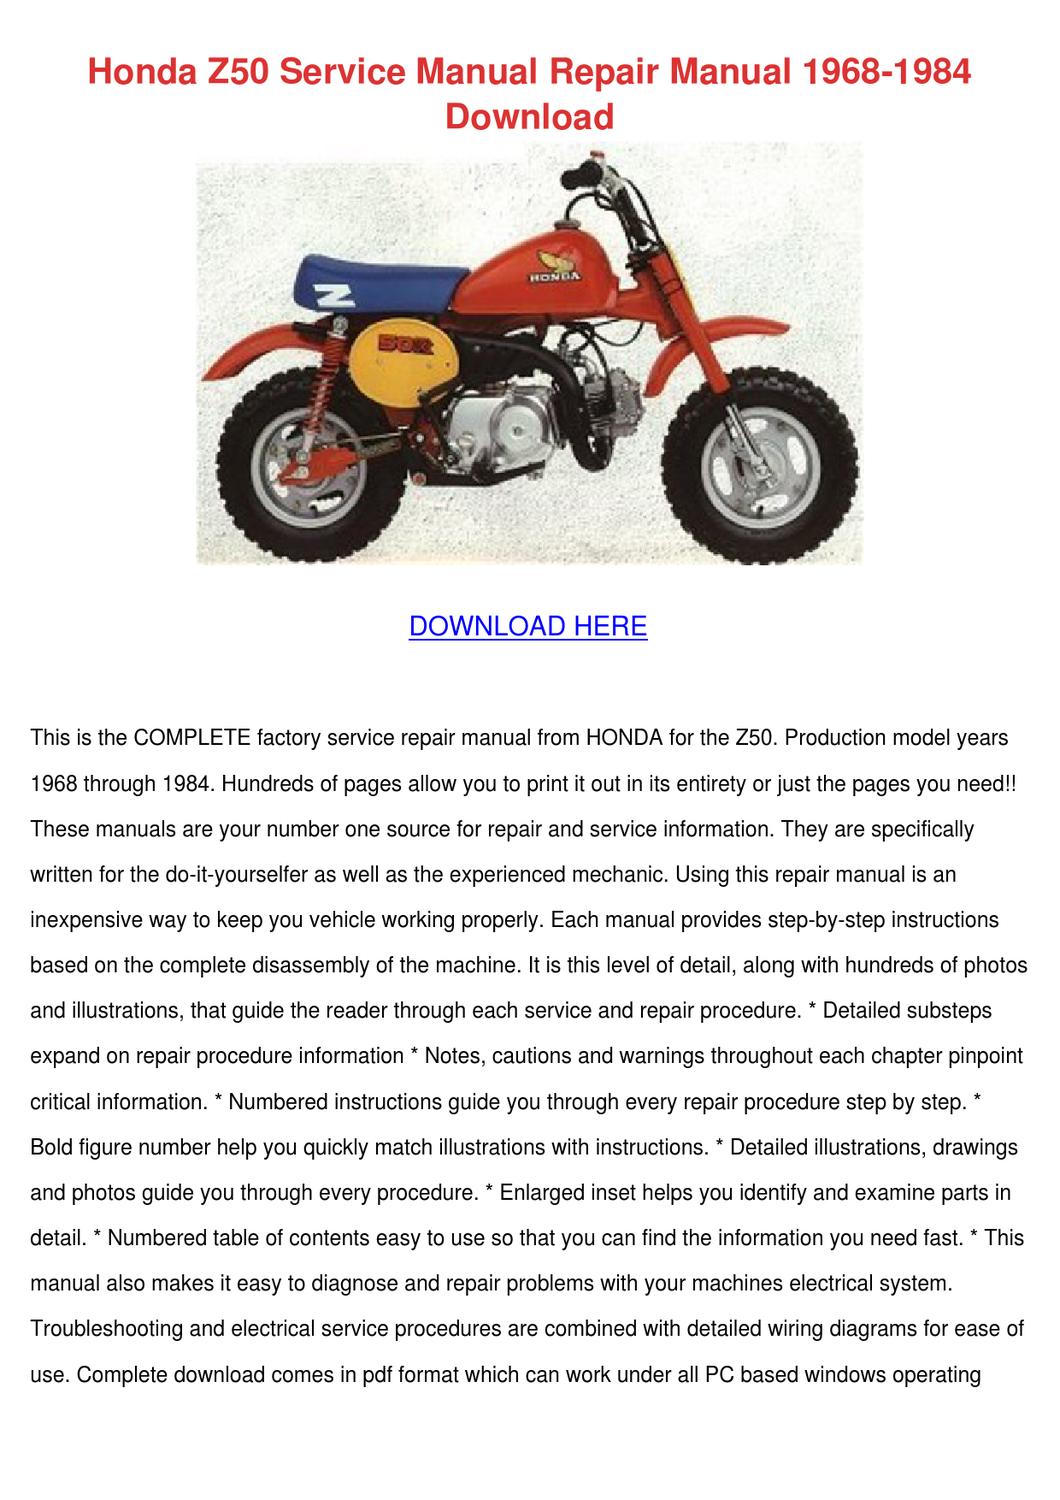 Service manual for 87 z50r download full